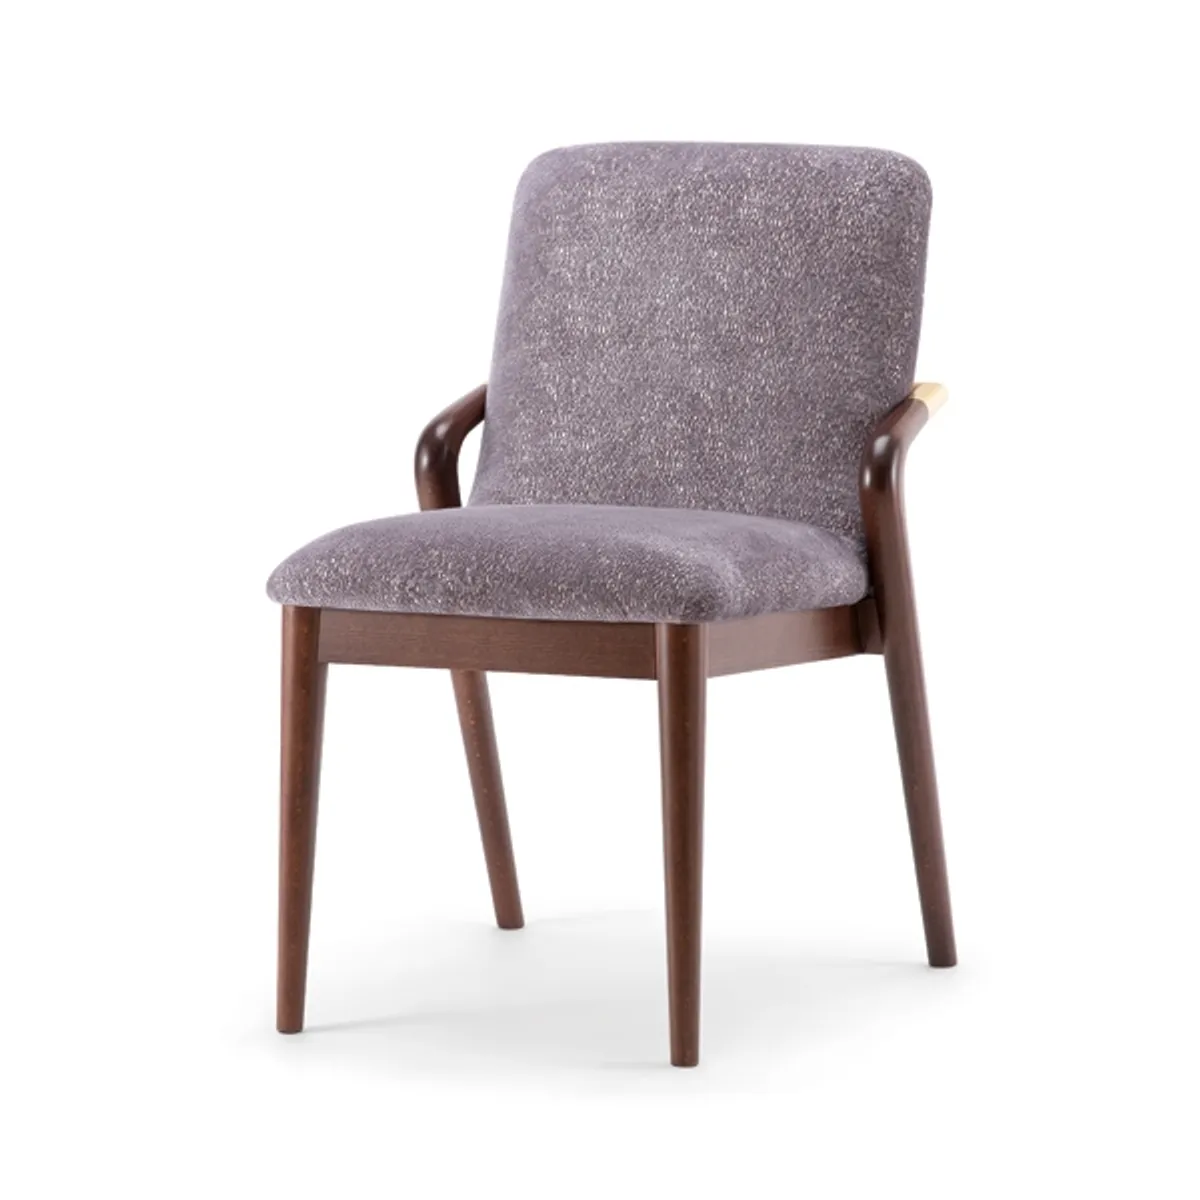 Gigi dining chair Inside Out Contracts